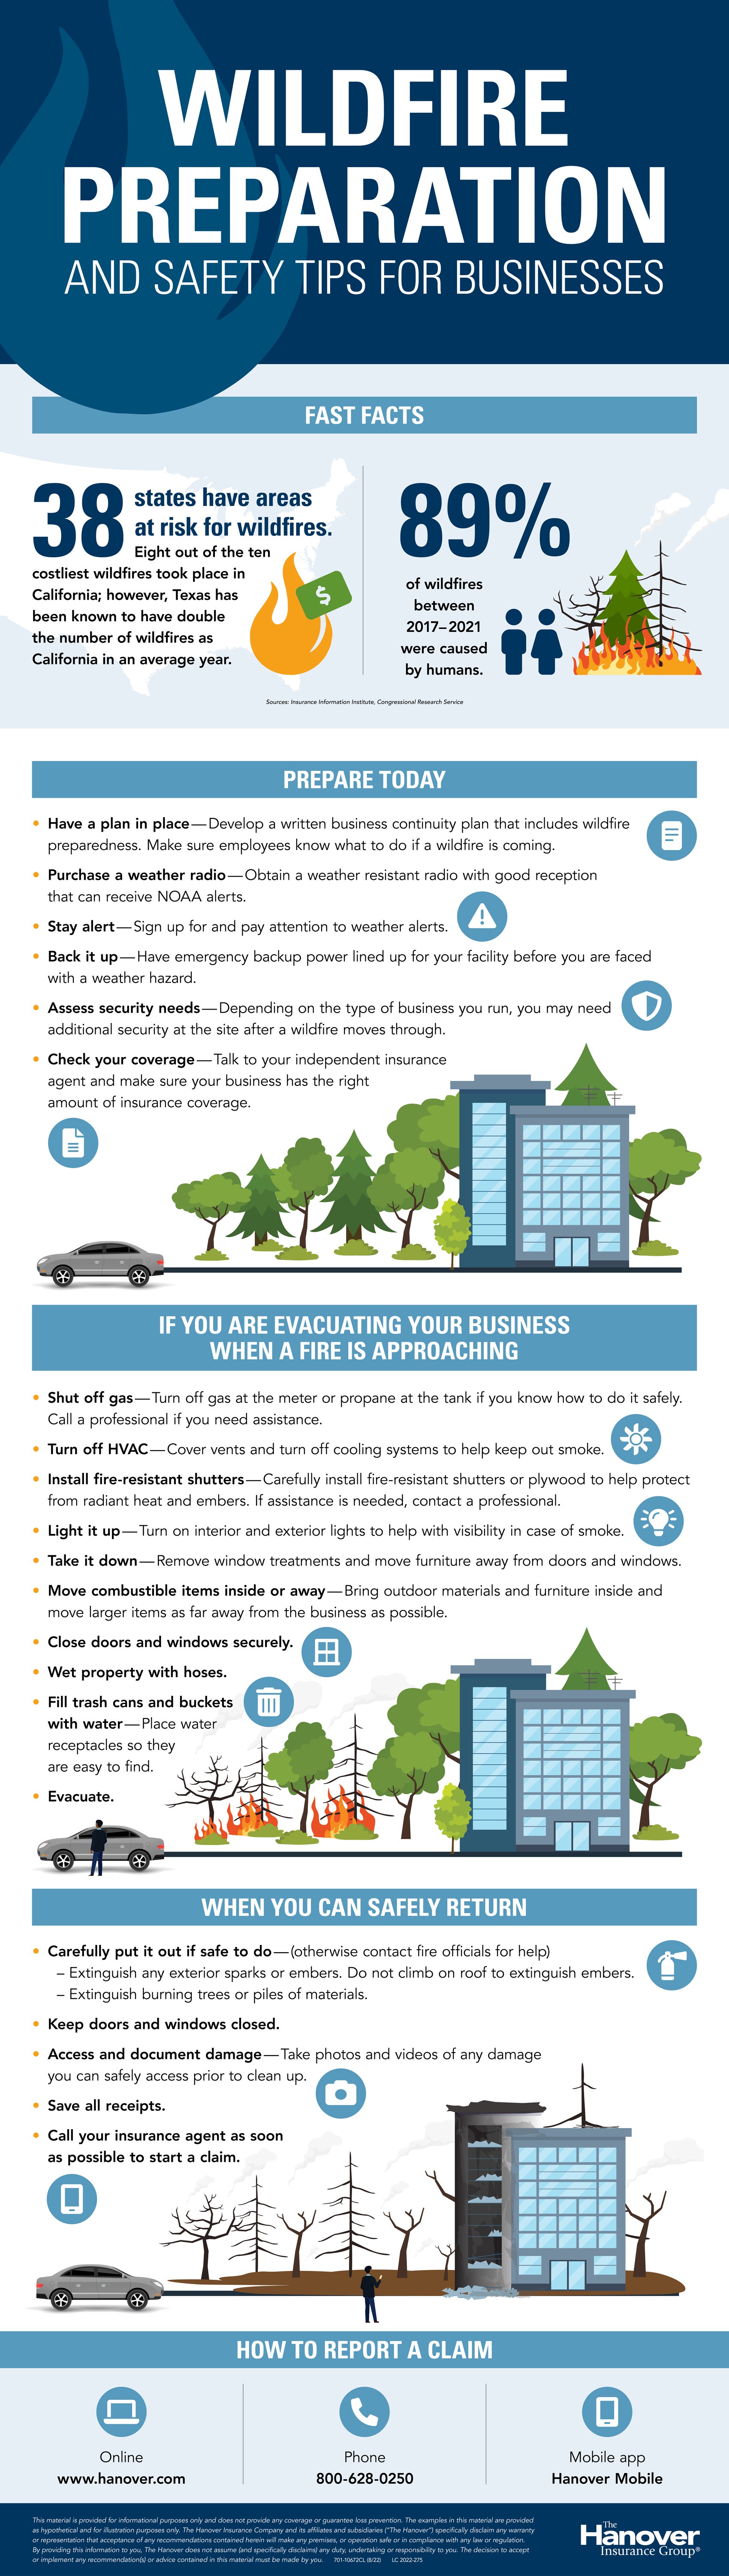 Infographic with business tips for what to do before, during and after a wildfire.